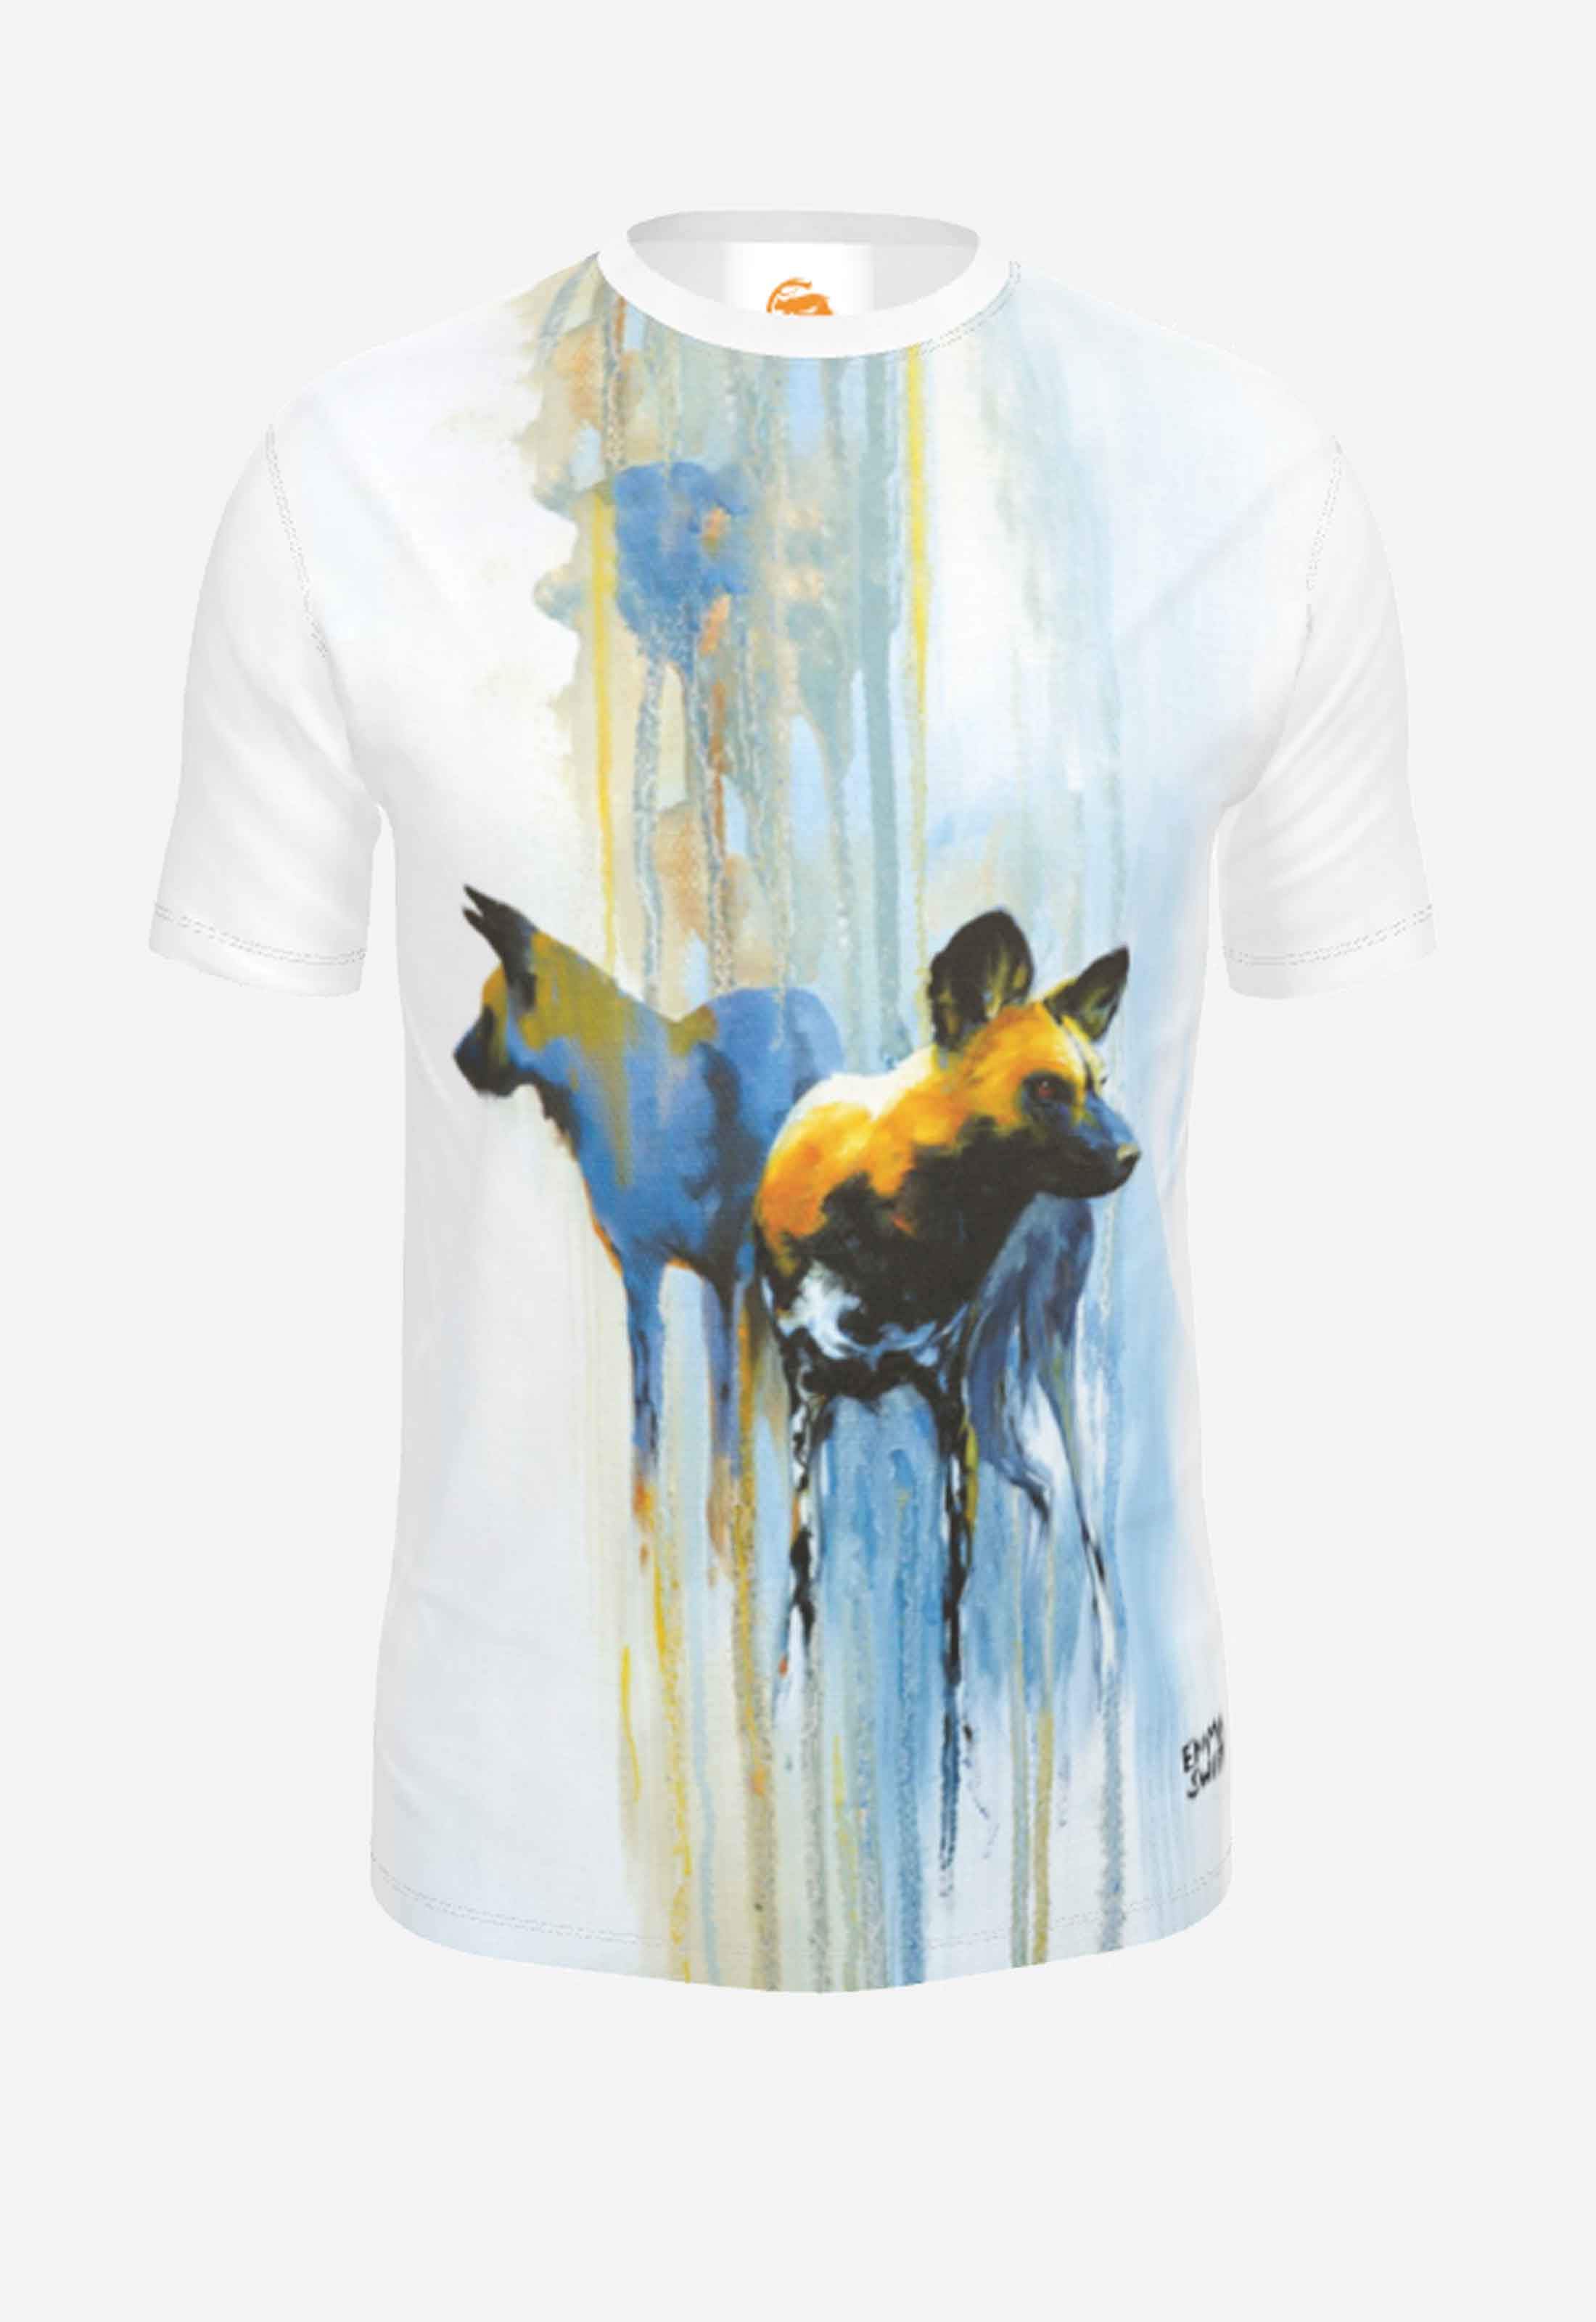 Main image for Painted Dogs Men's T-Shirt